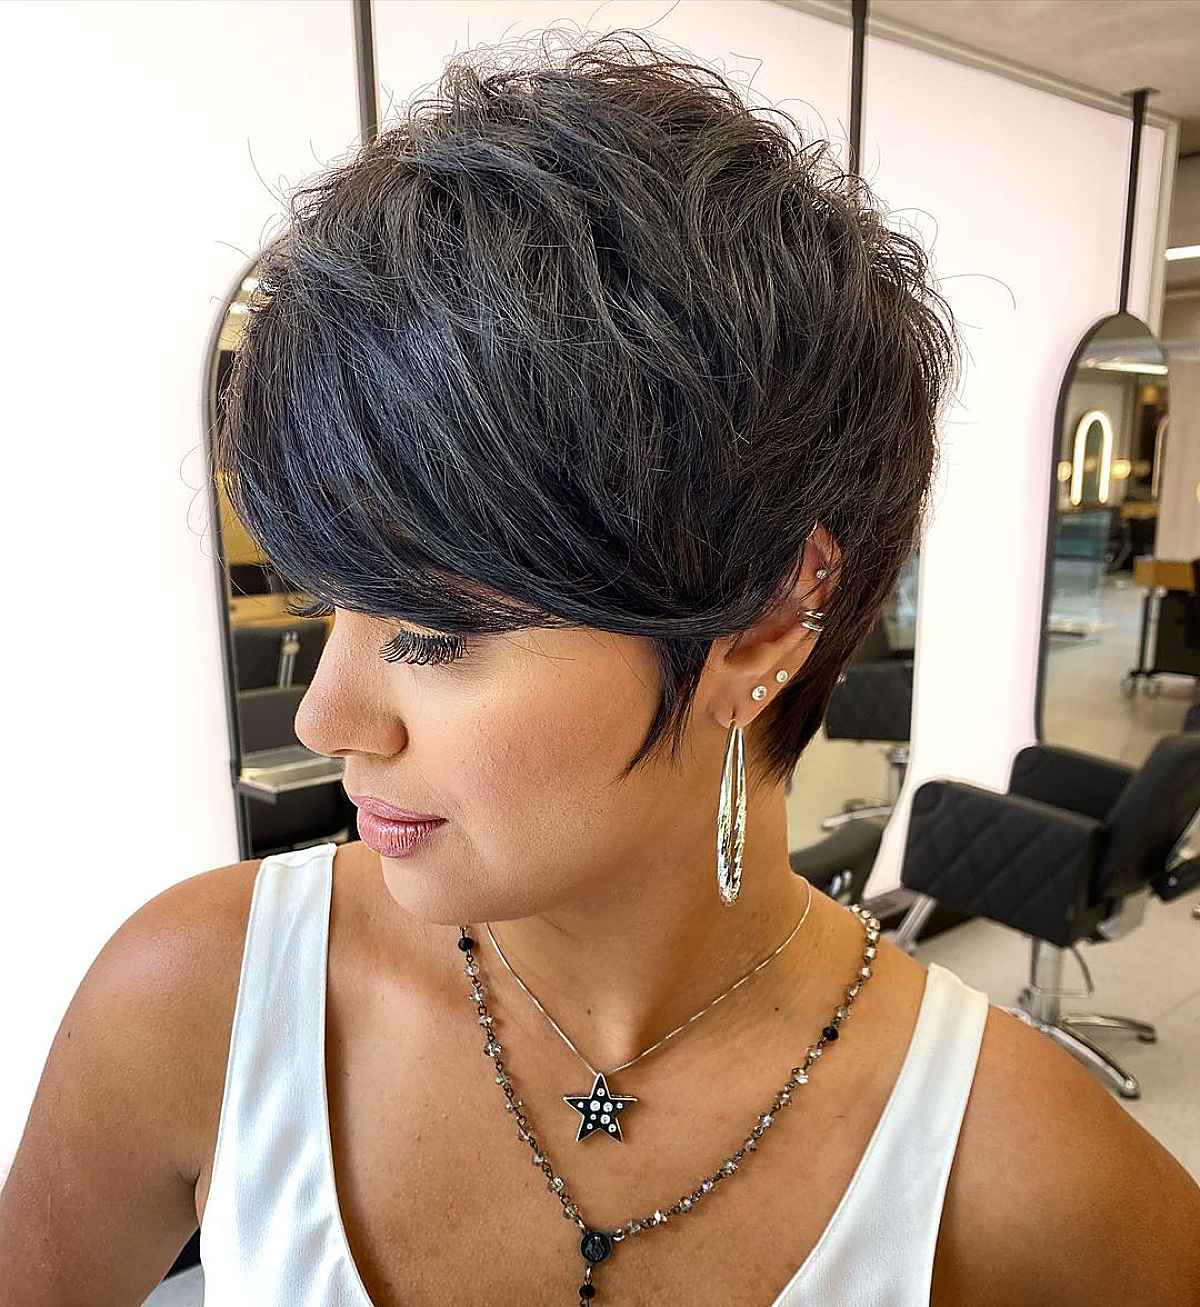 26 Best Layered Pixie Cut Ideas for a Short Crop with Movement